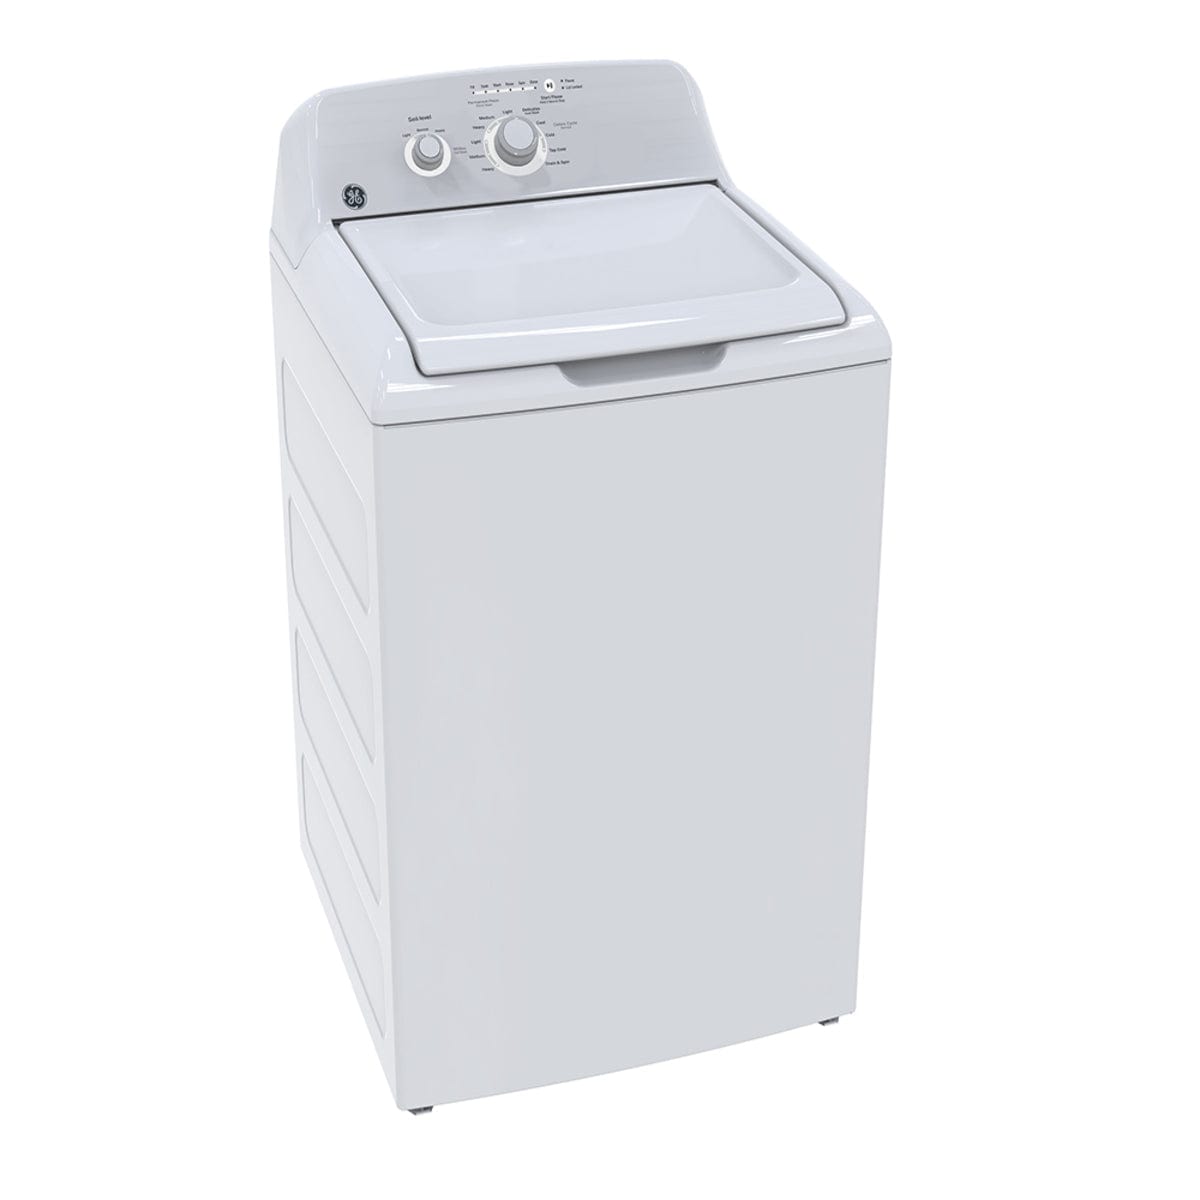 GE 27 Inch 4.4 cu. ft. Top Load Washer High Efficiency in White Model # GTW302BMPWW